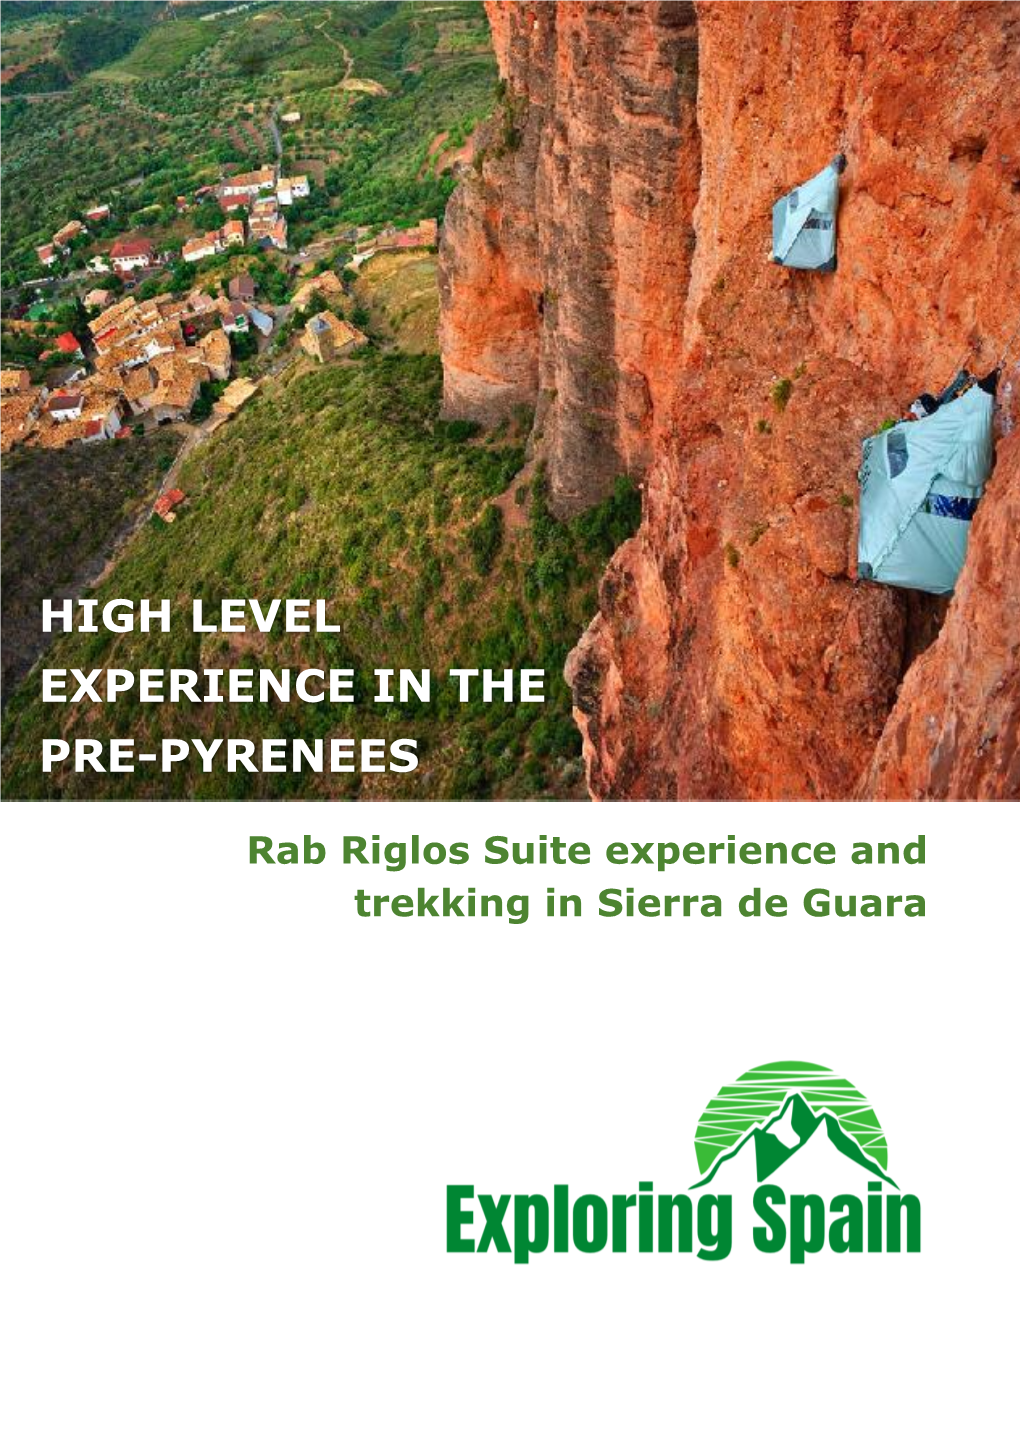 High Level Experience in the Pre-Pyrenees